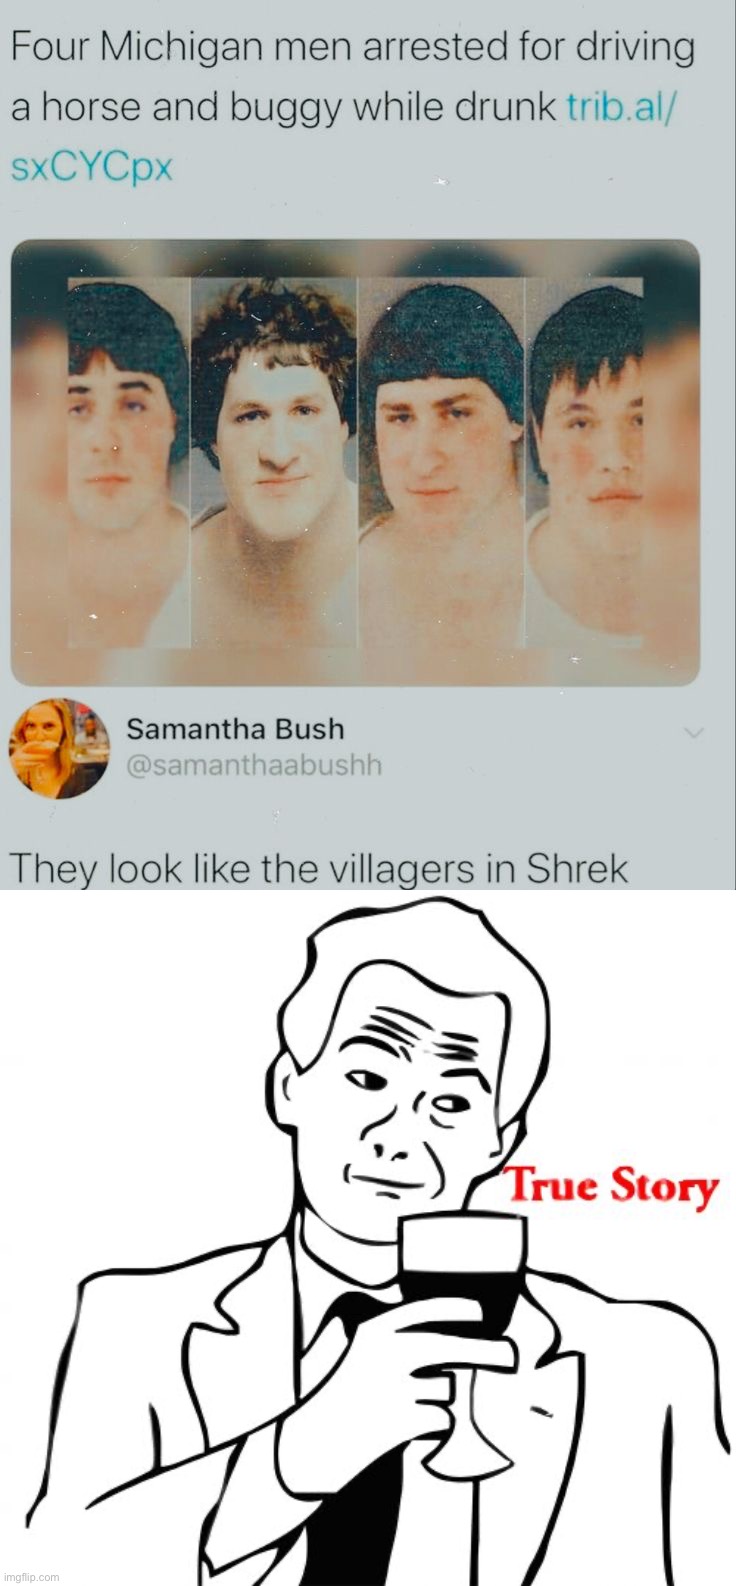 True story | image tagged in memes,true story,funny,wait what,oh wow,shrek | made w/ Imgflip meme maker